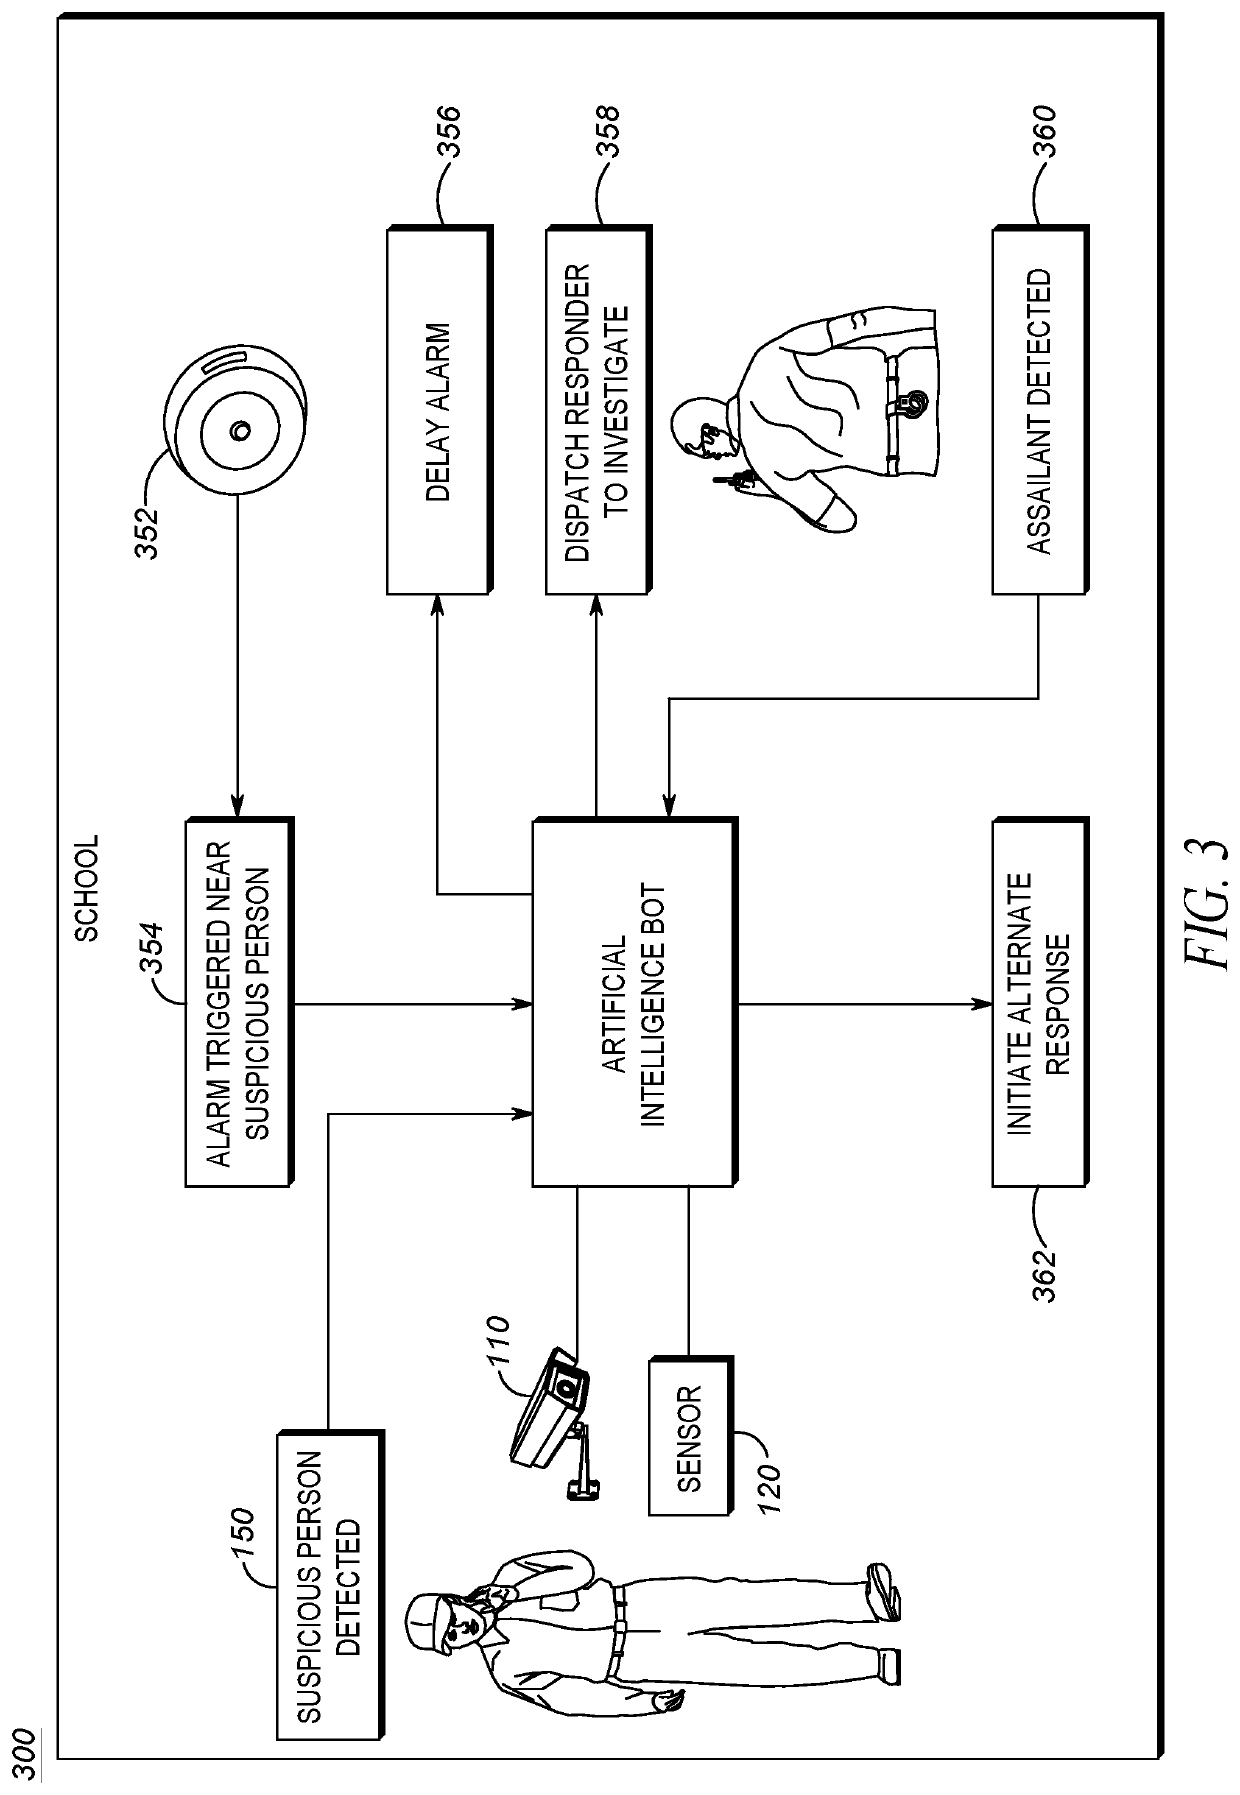 System and method for delaying an alert based on suspicious activity detection